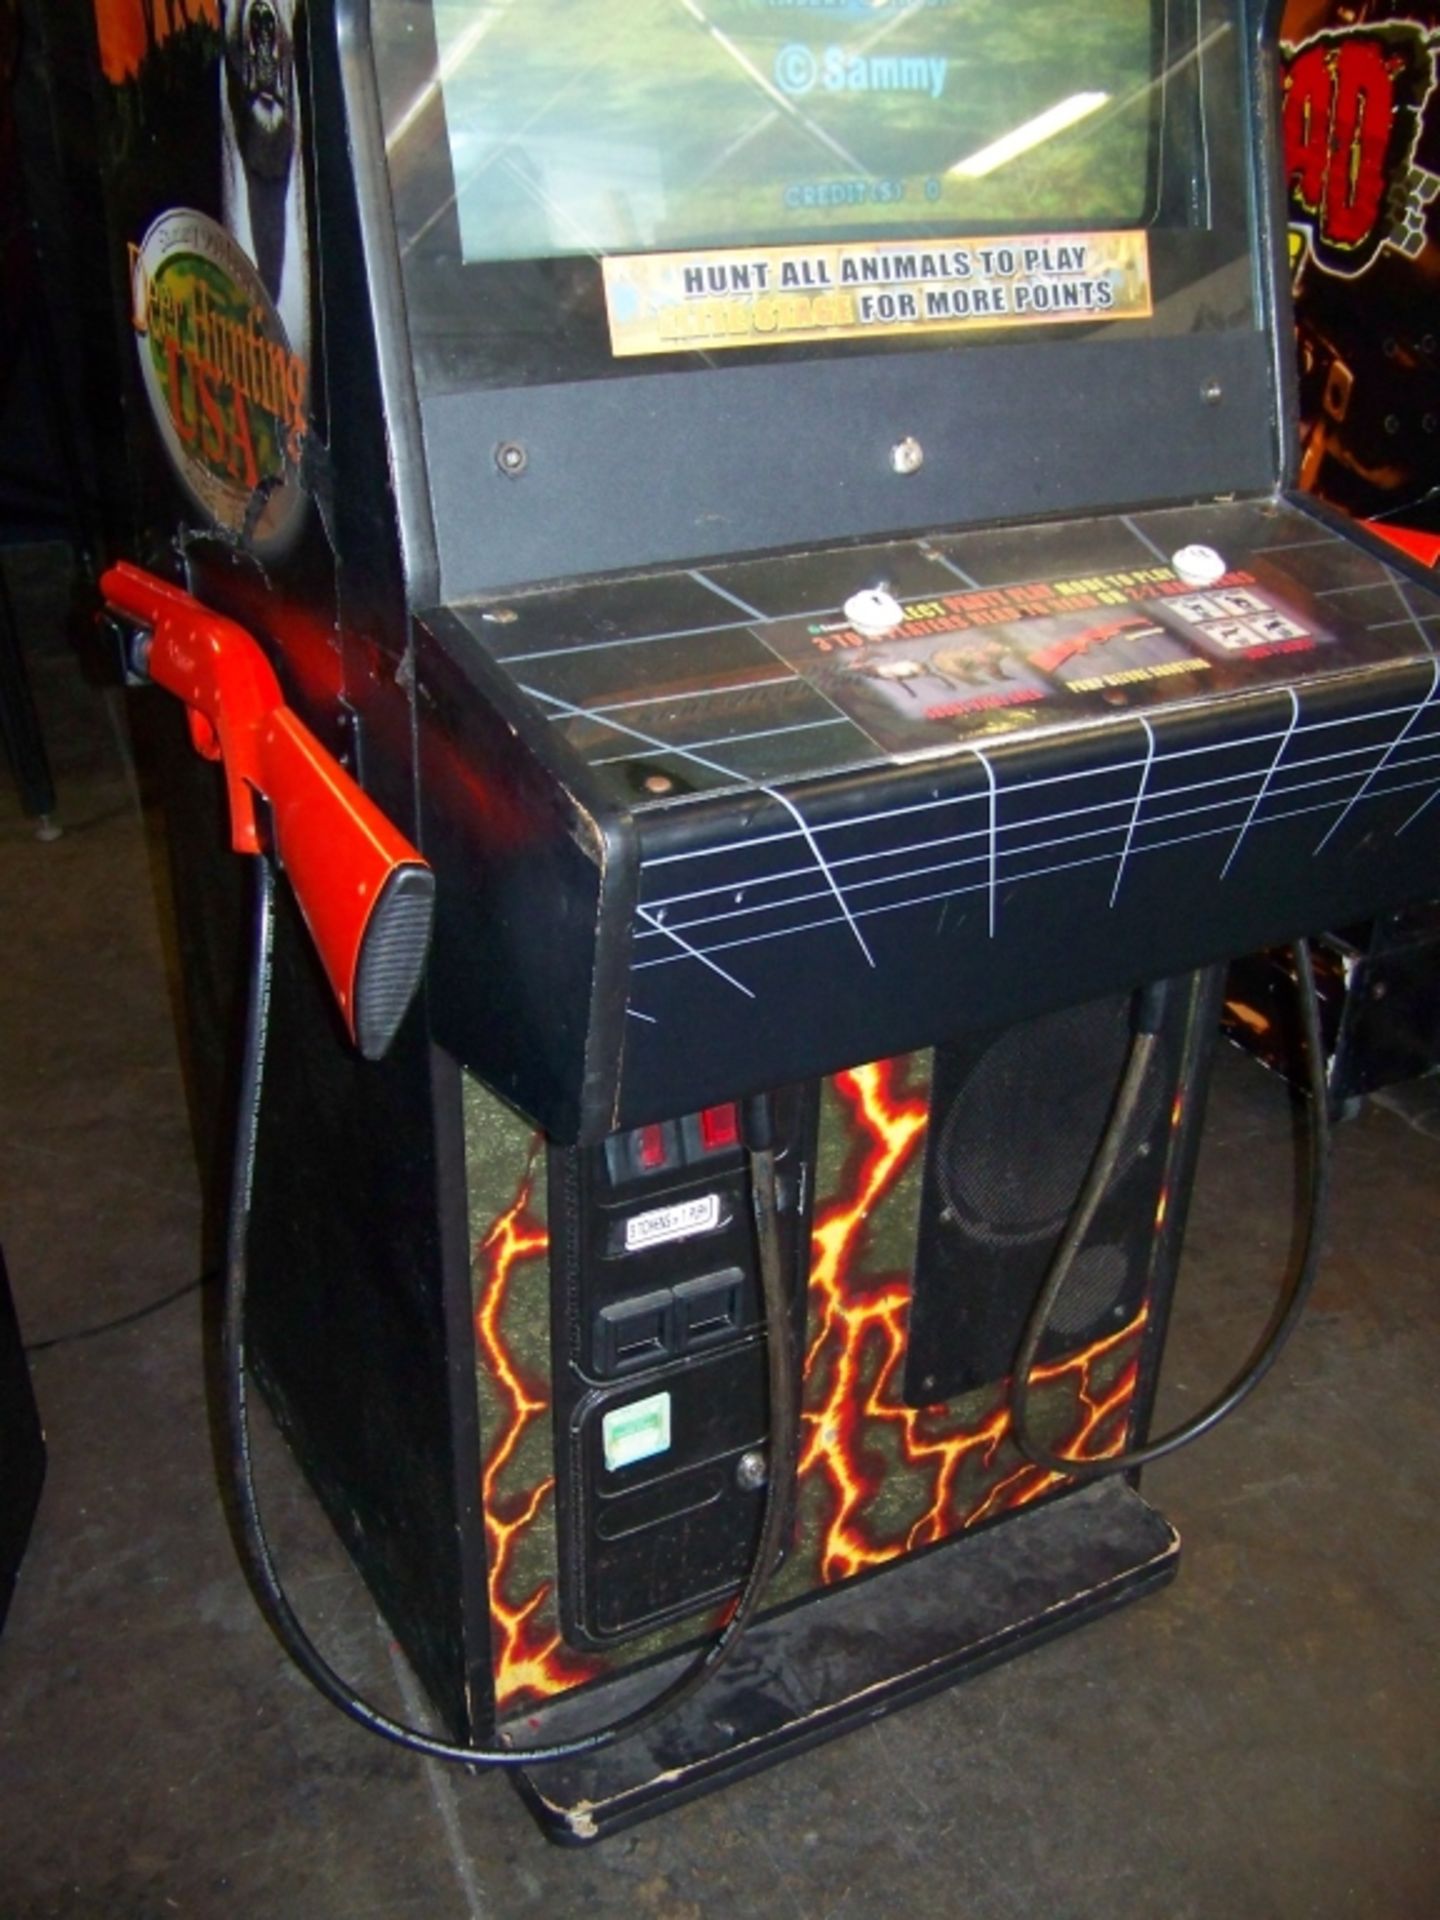 EXTREME HUNTING SHOOTER ARCADE GAME - Image 3 of 3